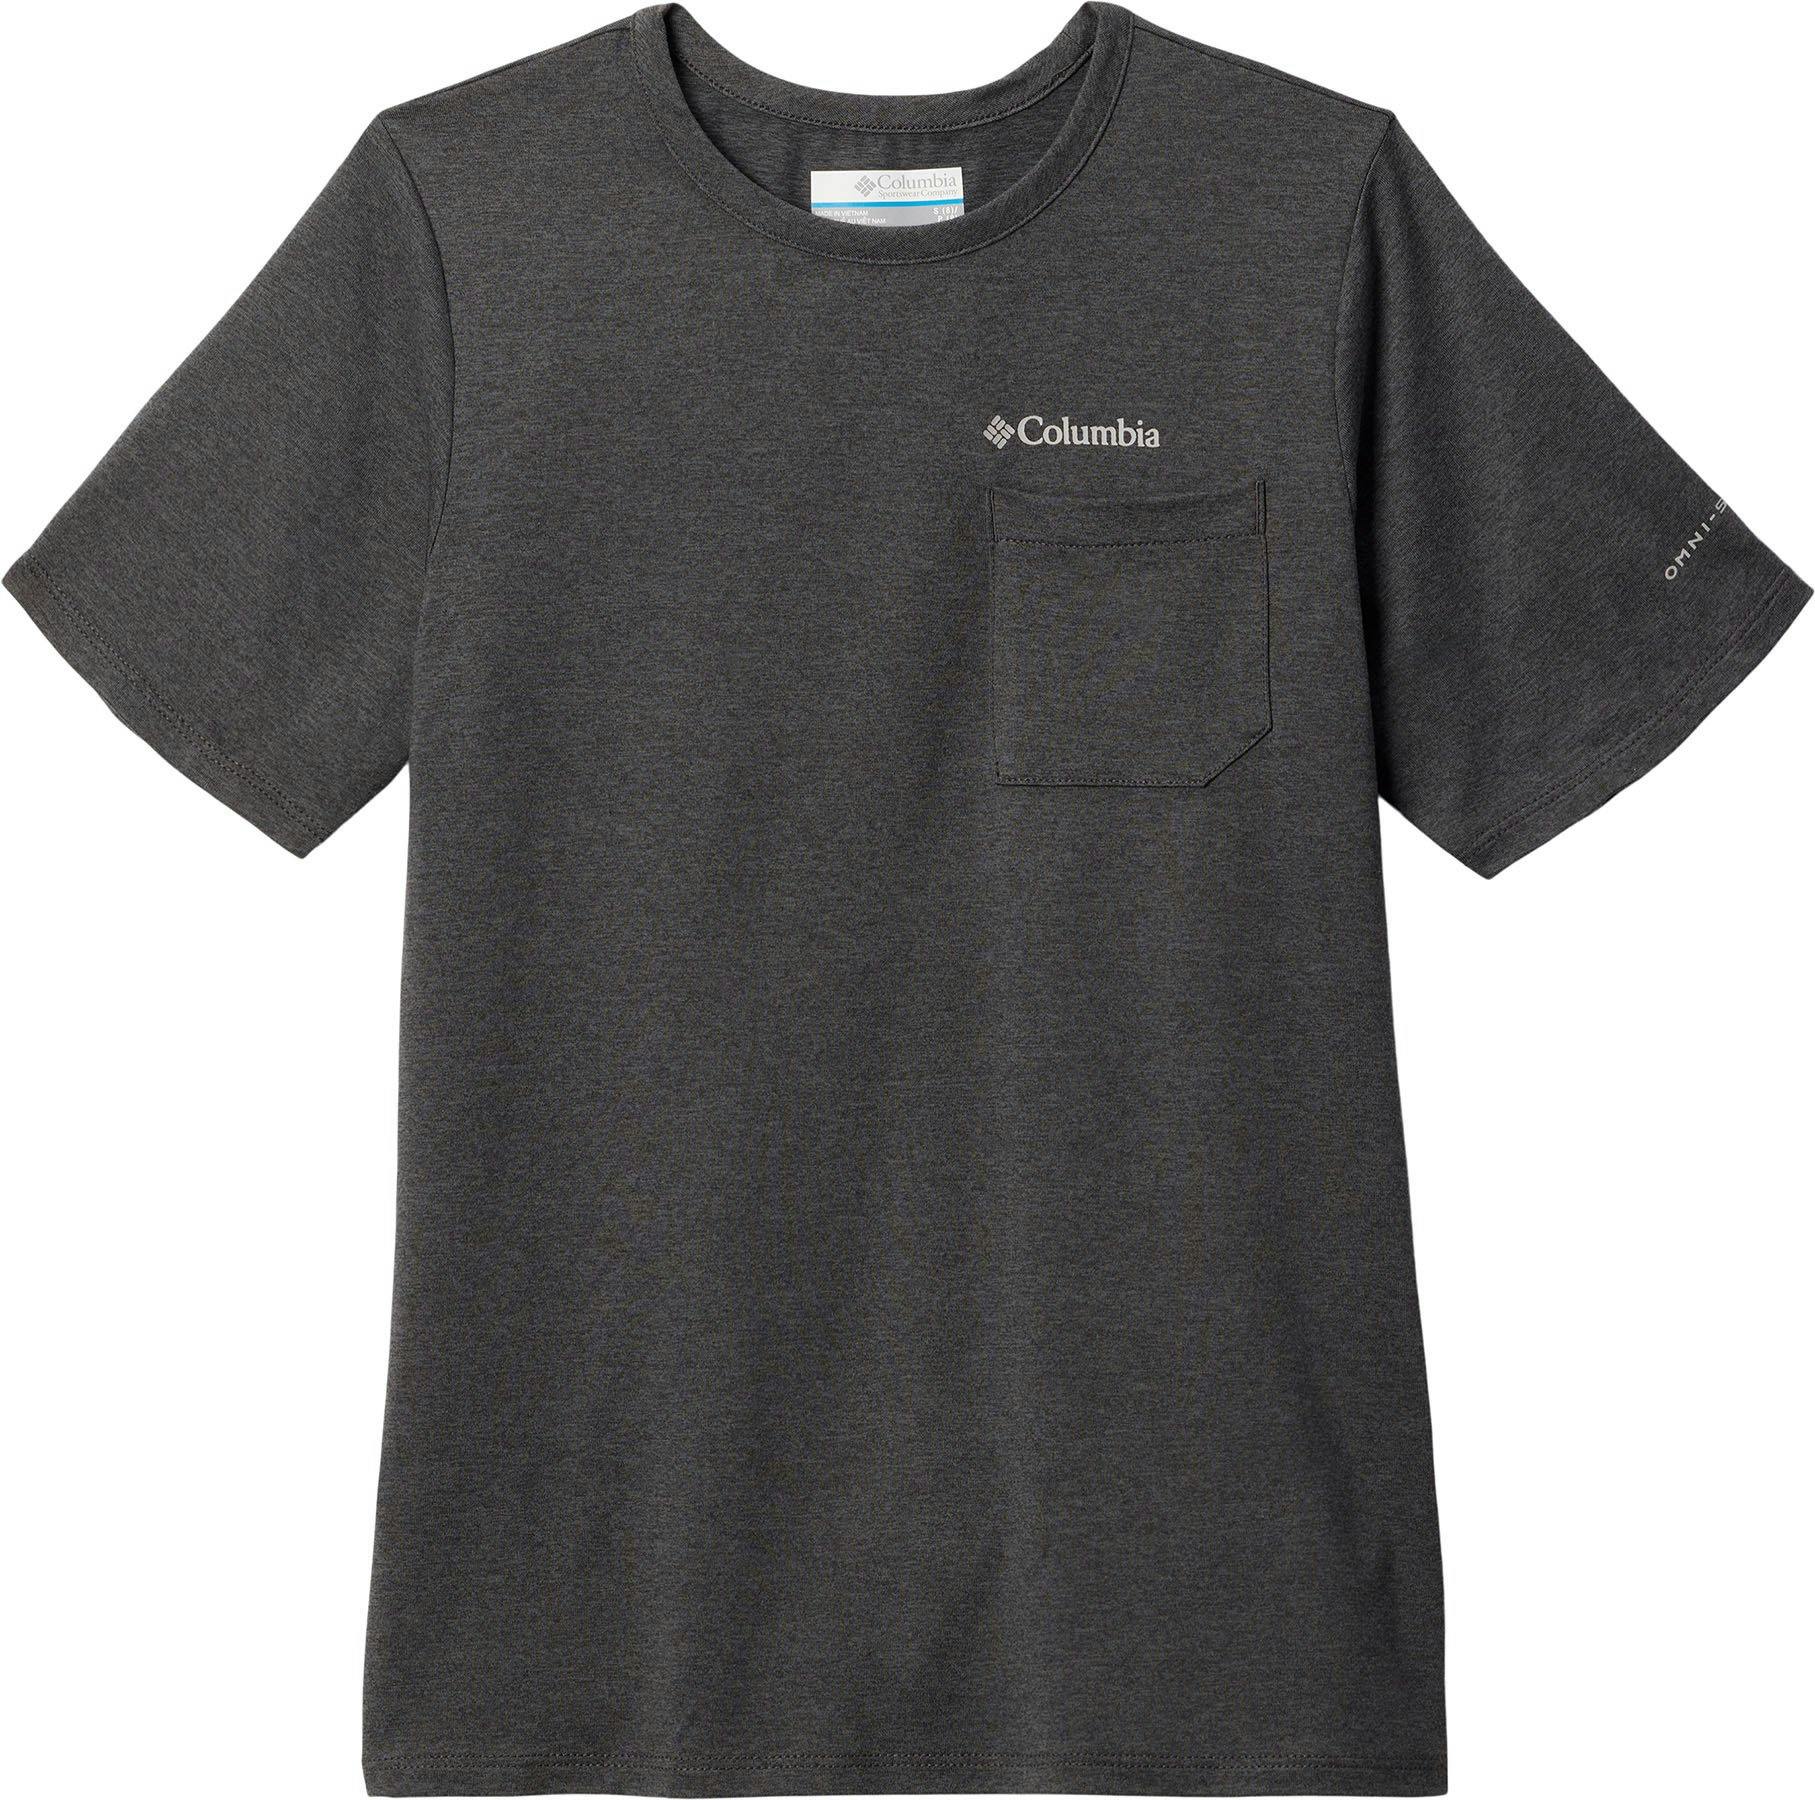 Product image for Tech Trail Short Sleeve T-Shirt - Boy's